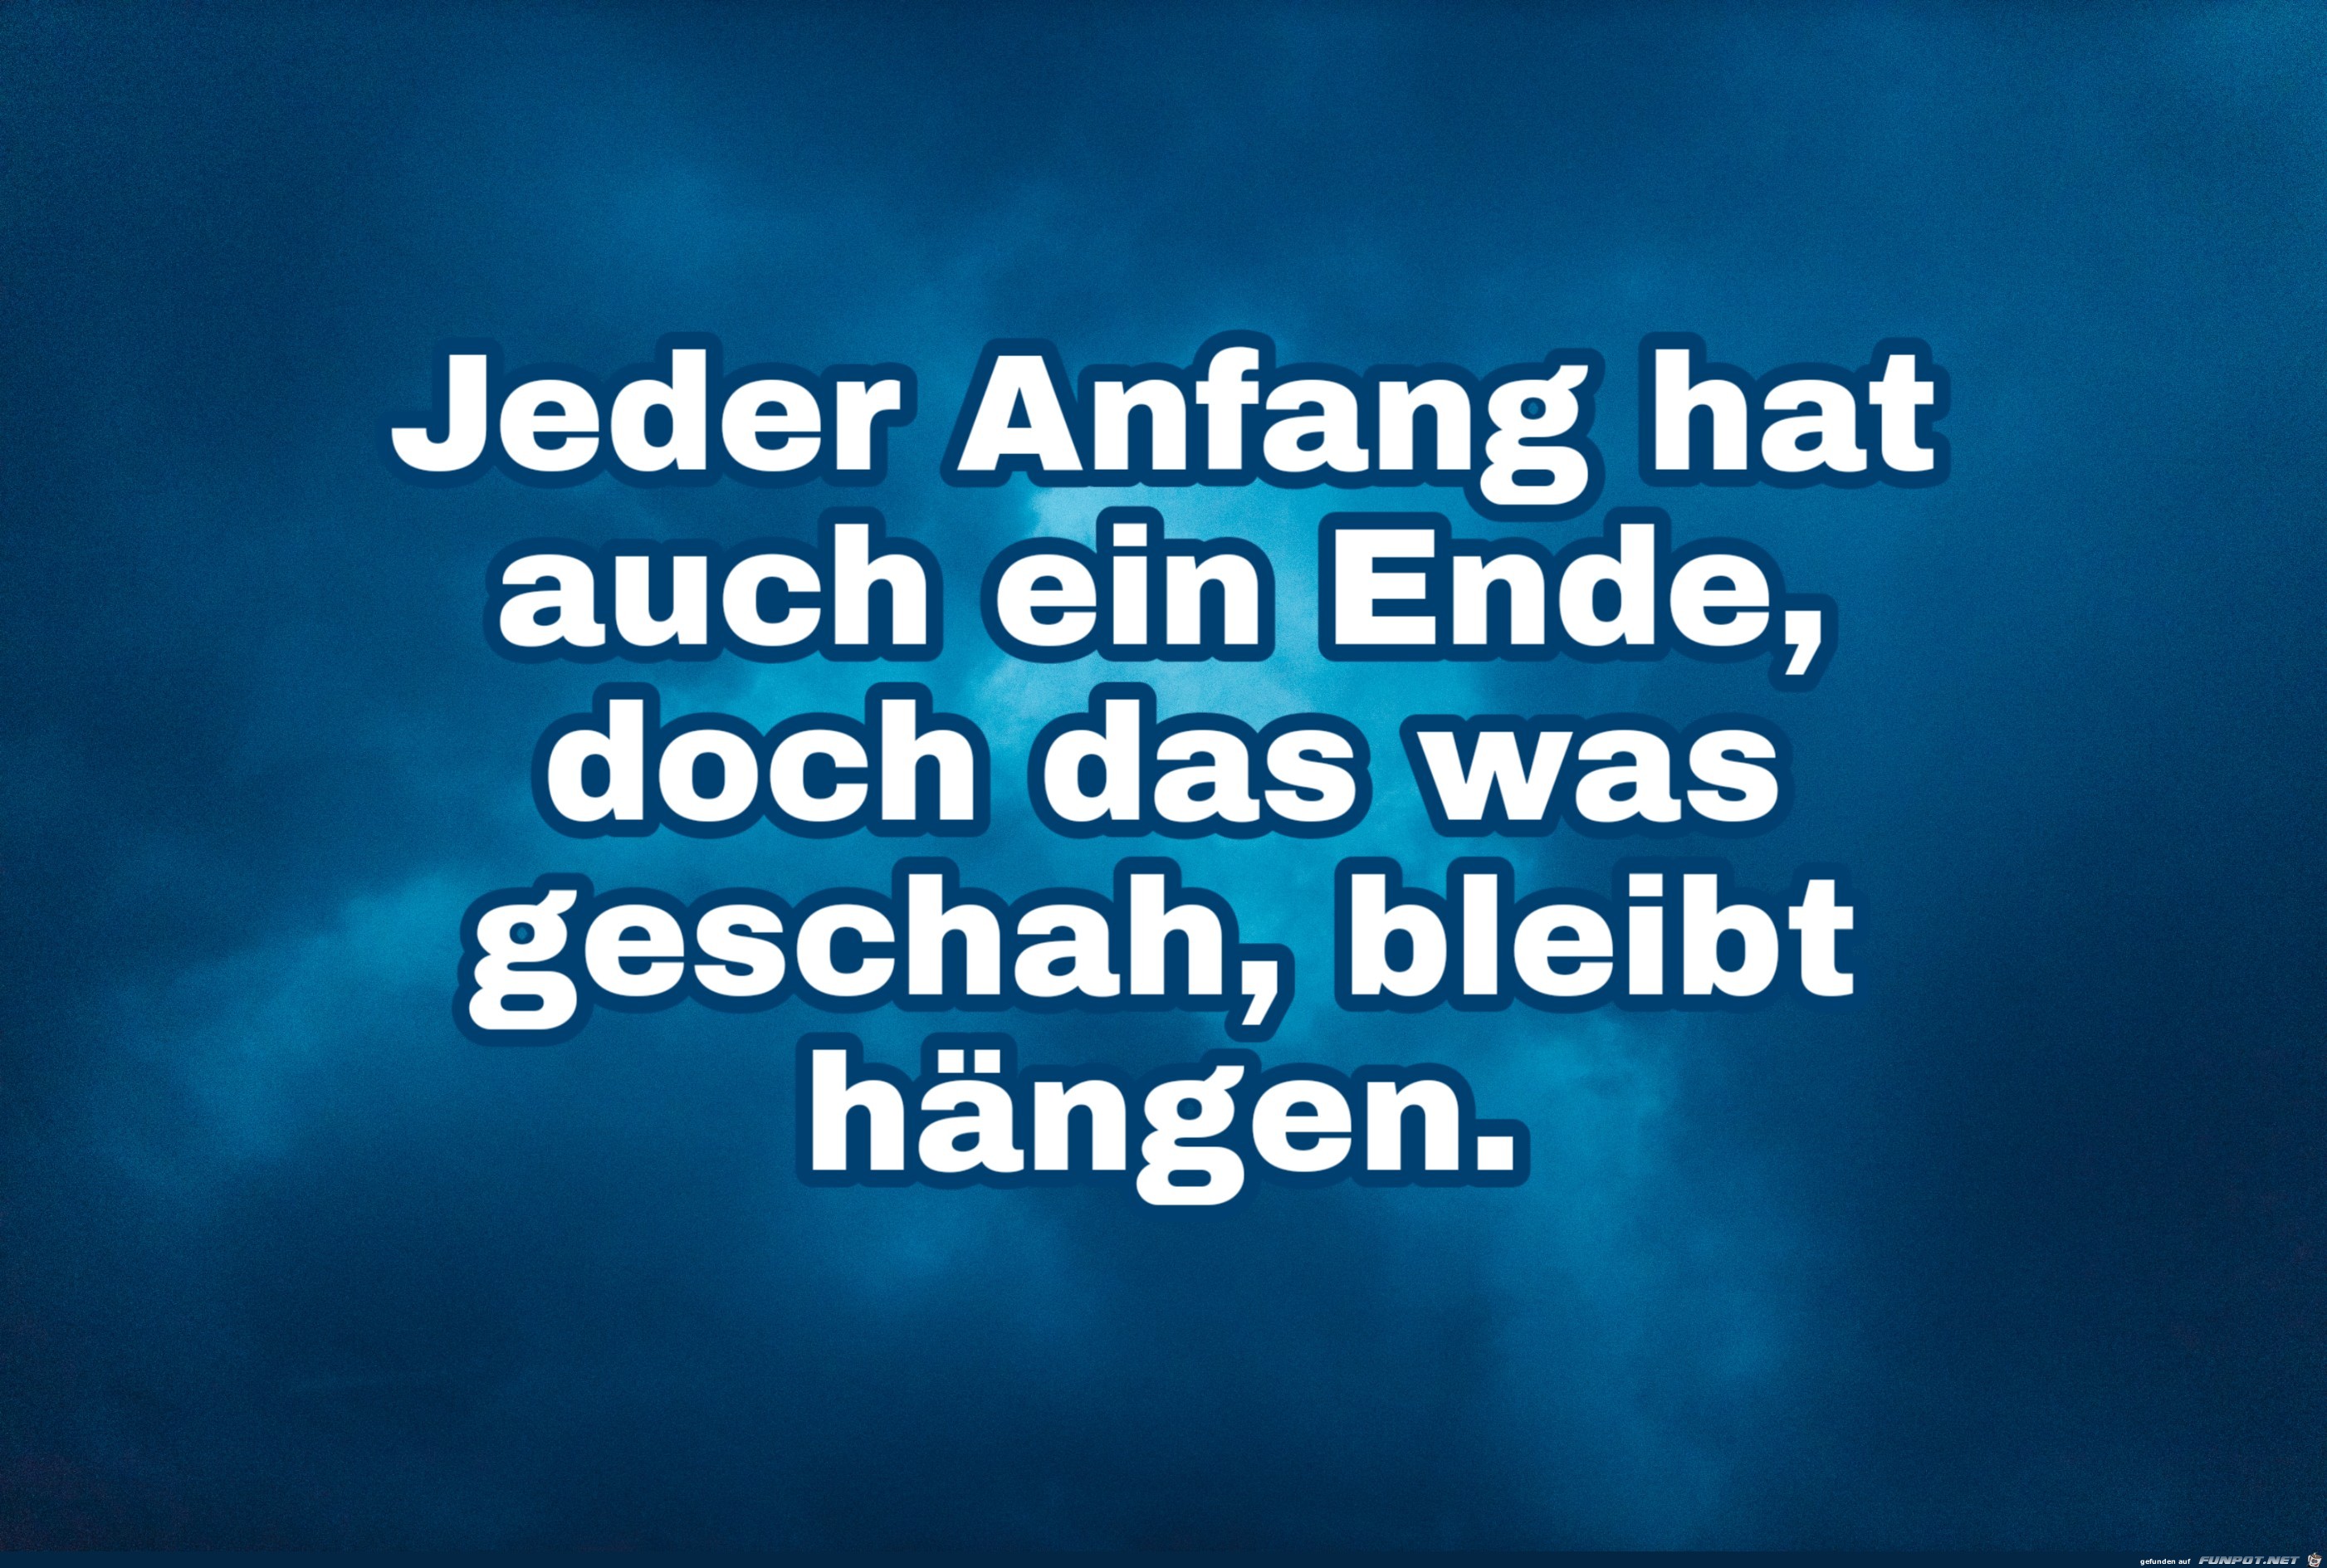 jeder anfang